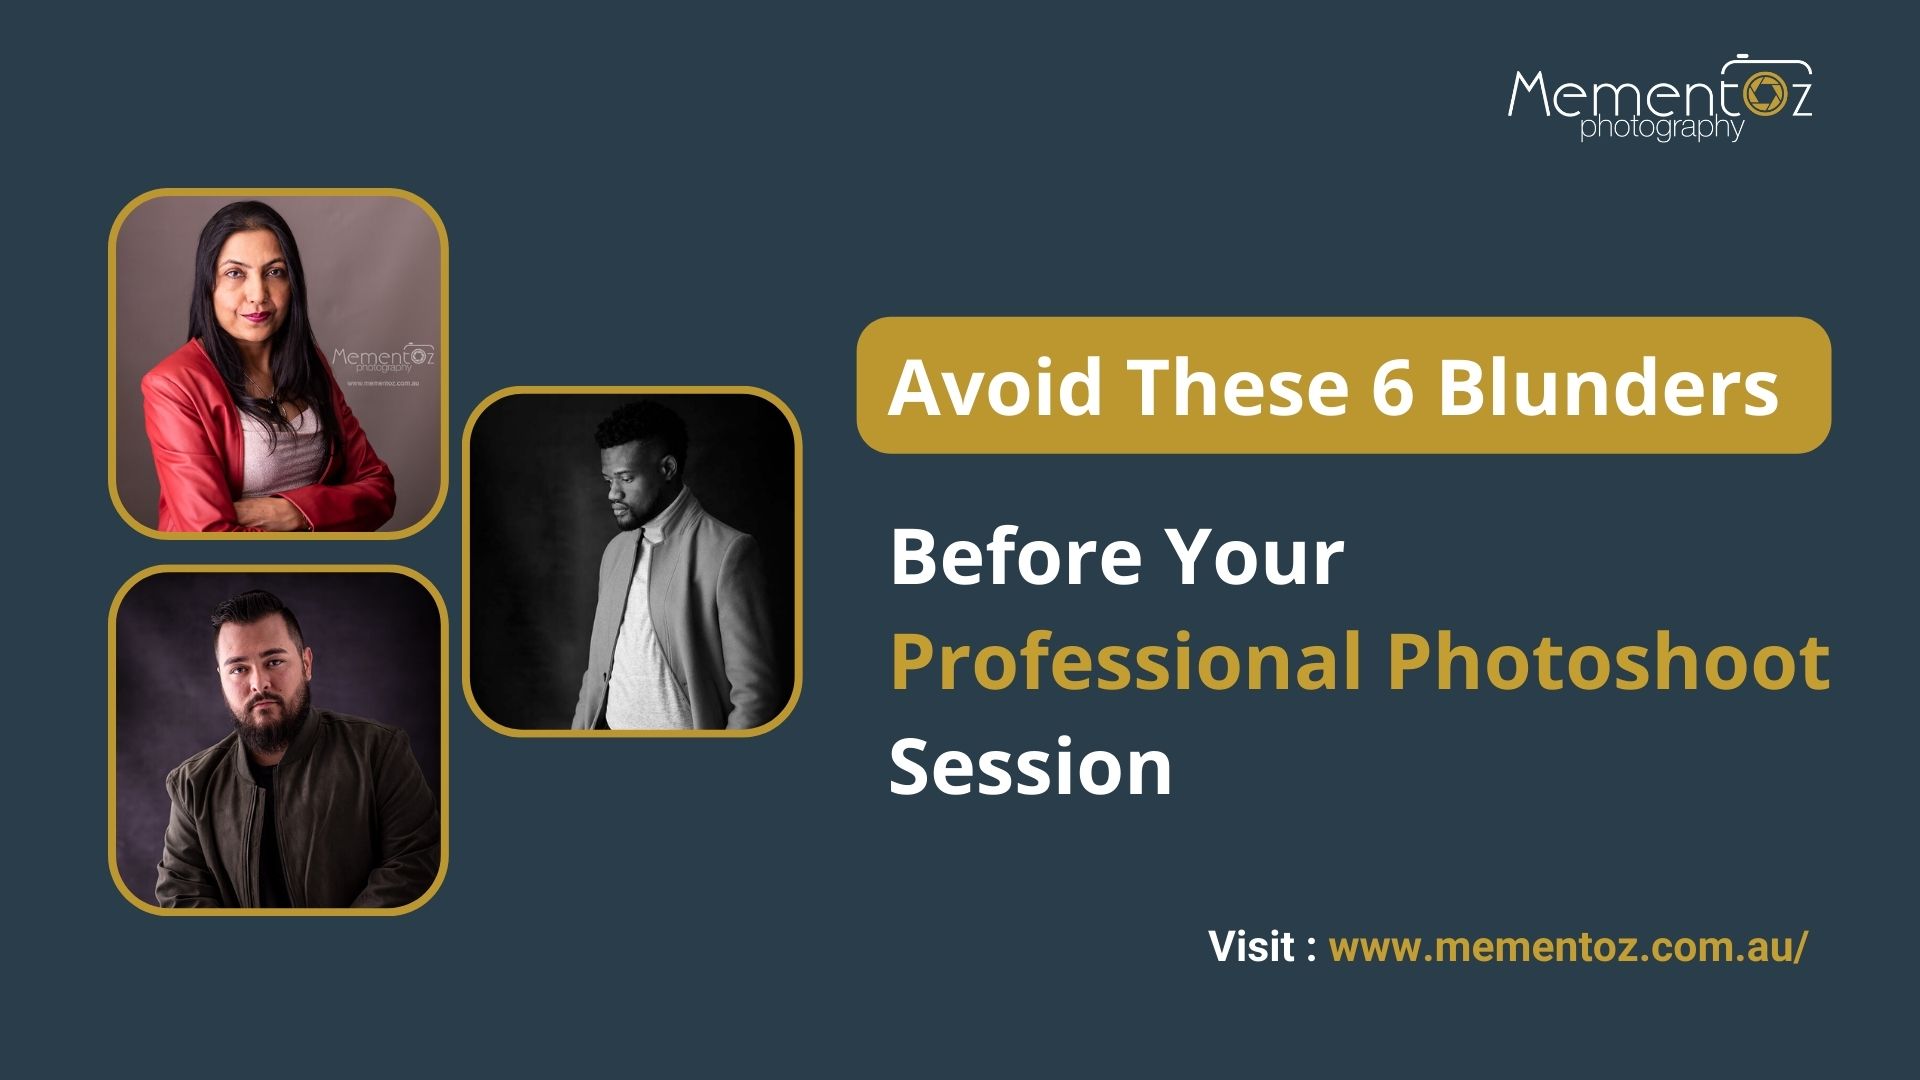 Professional Photographer Kapil Mehta's Blogs on how to Avoid These 6 Blunders Before Your Professional Photoshoot Session